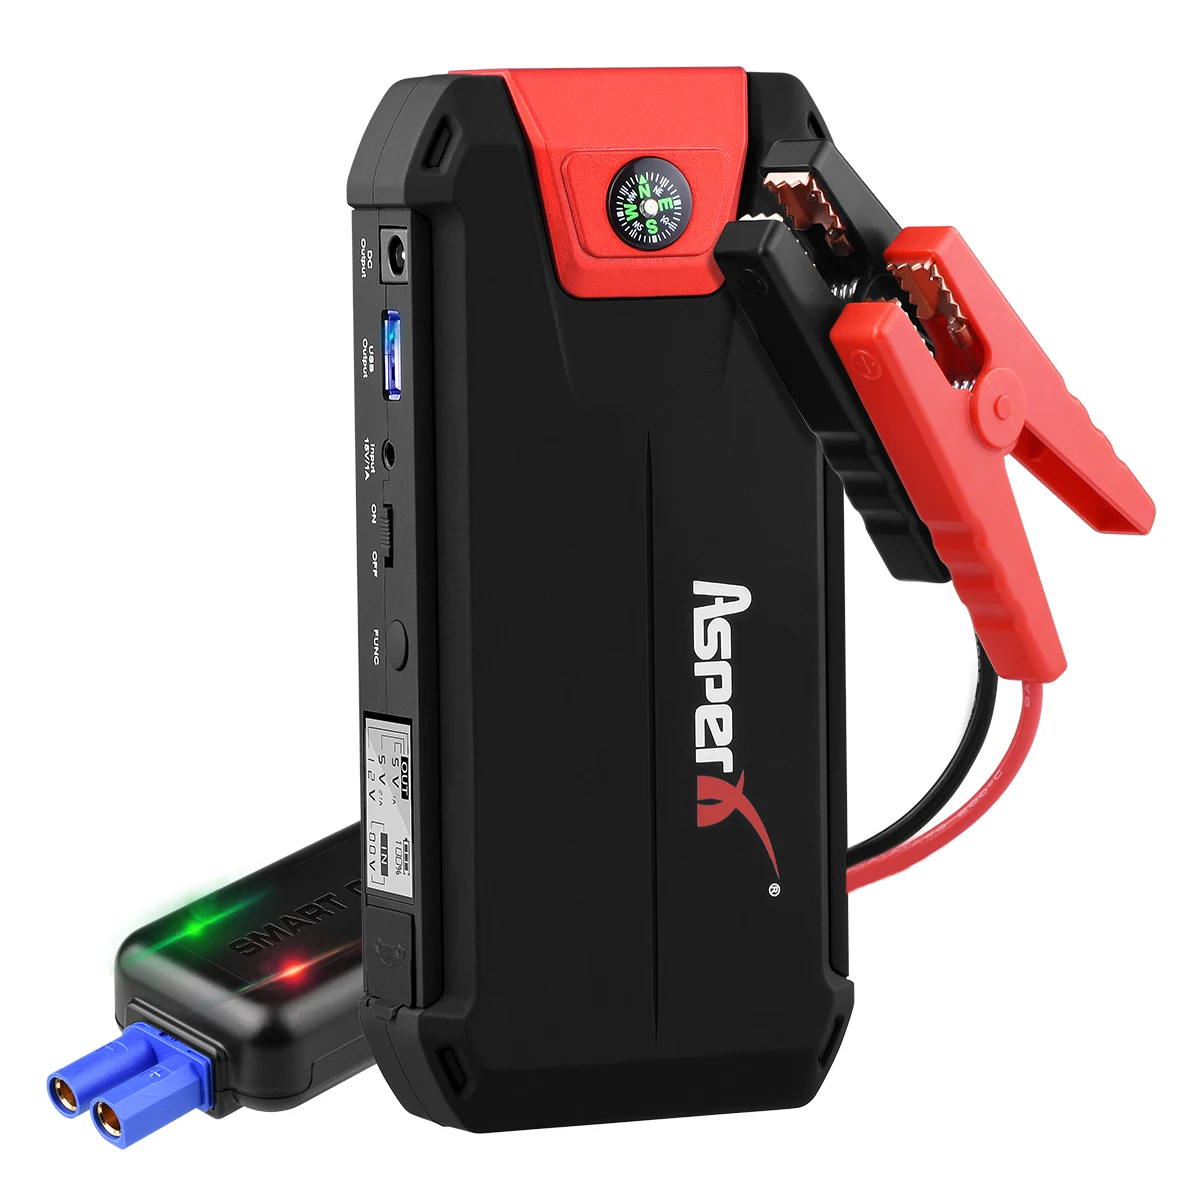 GREPRO Free Ship Portable 13800mAh Car Jump Starter 1000A Peak 12V Auto Battery Booster Power Pack with LCD Display Jumper Cable